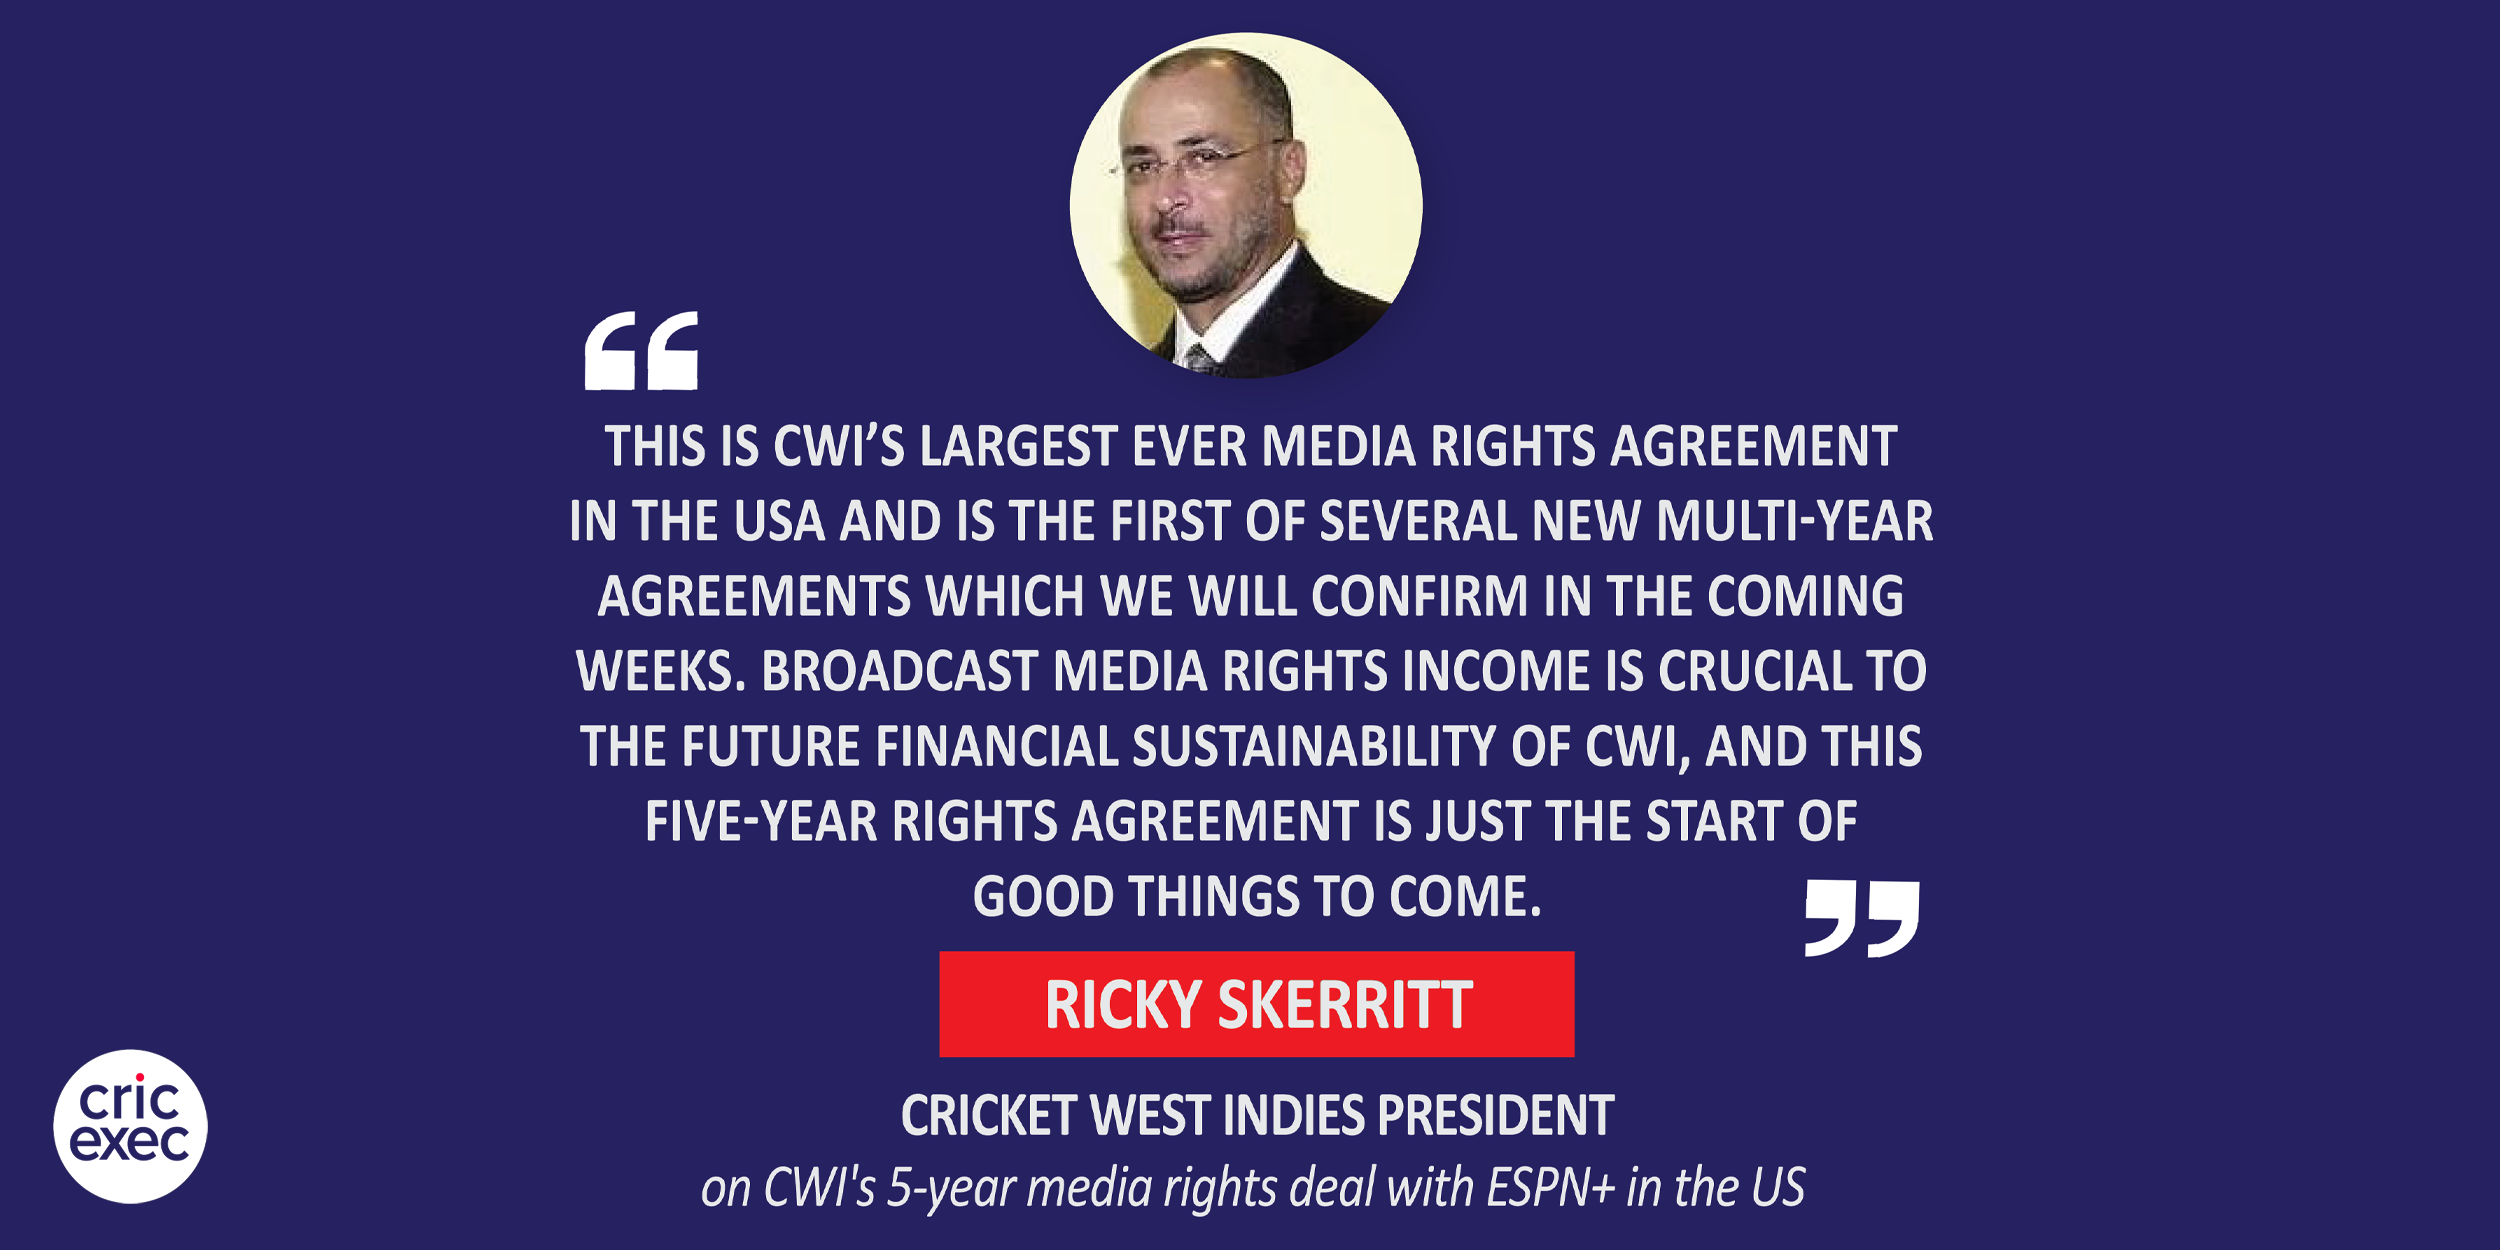 Ricky Skerritt, Cricket West Indies, President on CWI's 5-year media rights deal with ESPN+ in the US